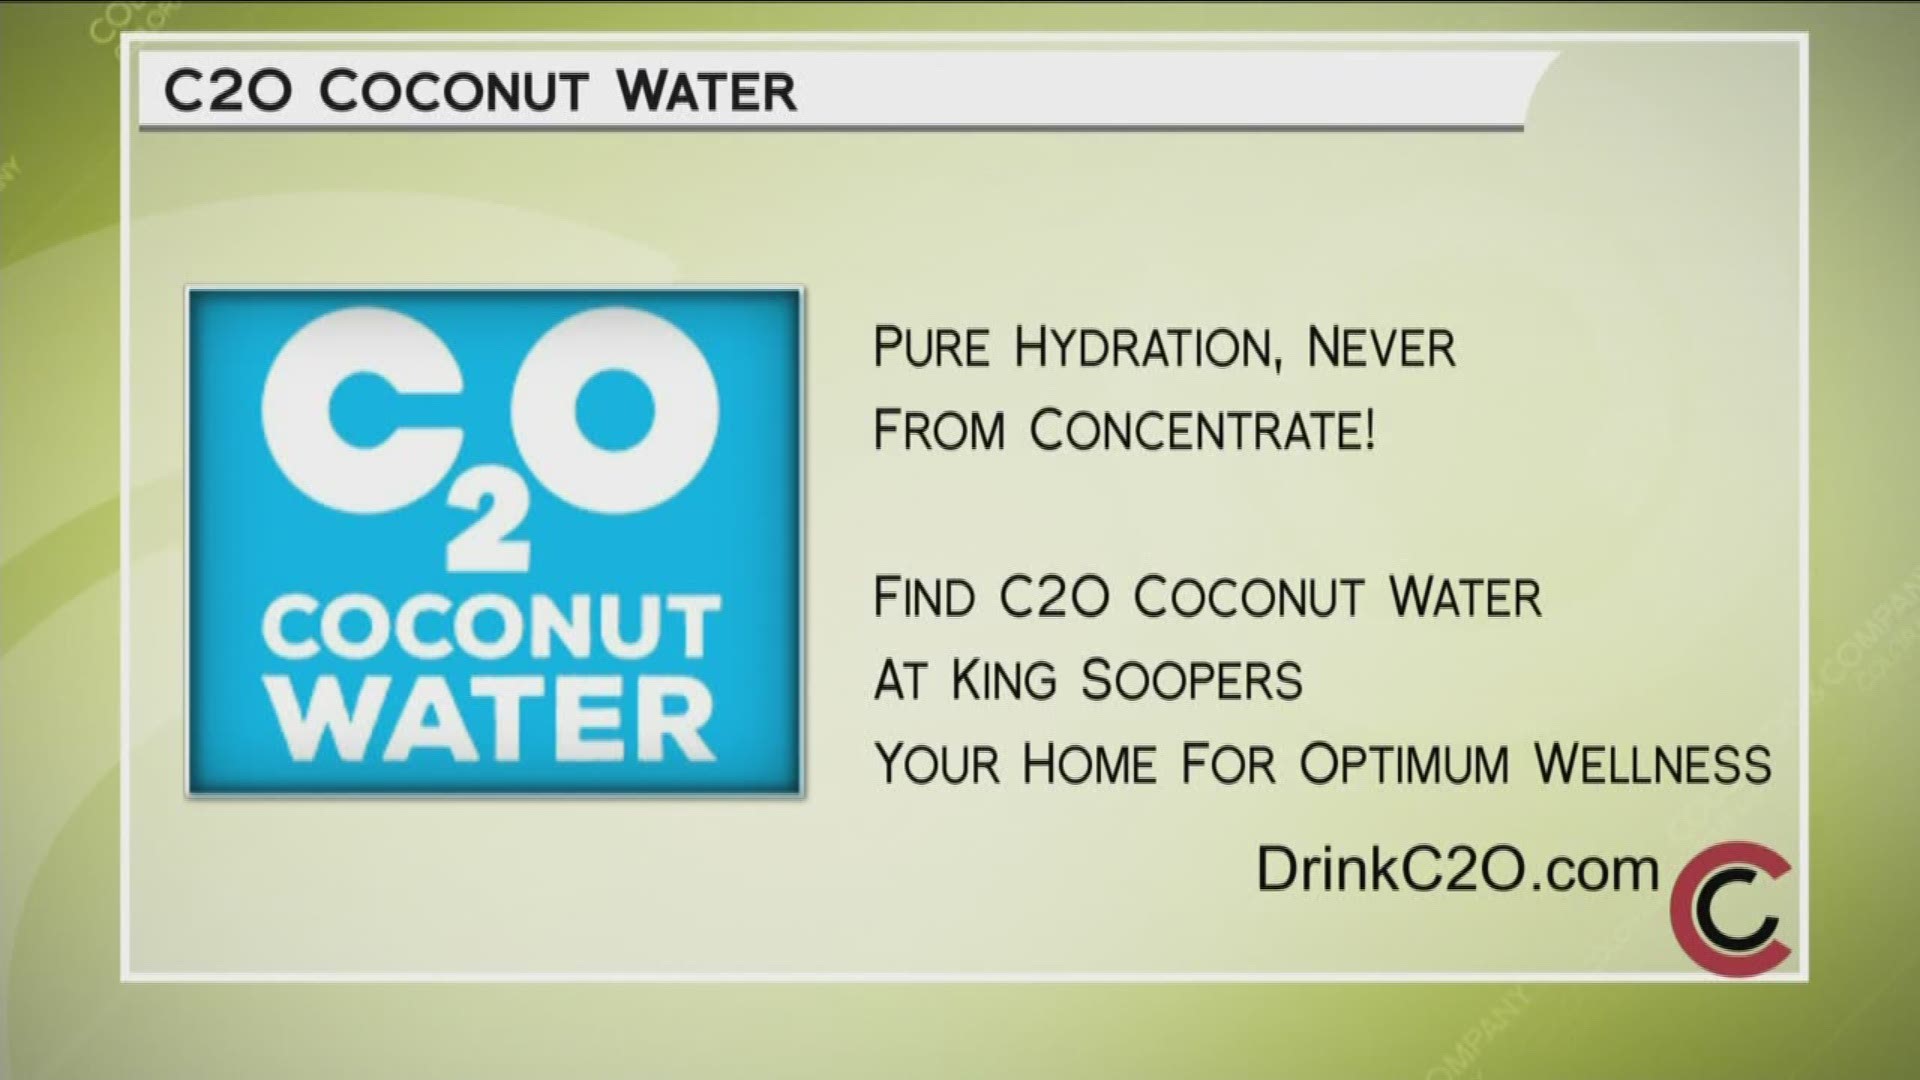 Find C2O Coconut Water at your neighborhood King Soopers, your home for Optimum Wellness. Find recipes online at www.DrinkC2O.com. 
THIS INTERVIEW HAS COMMERCIAL CONTENT. PRODUCTS AND SERVICES FEATURED APPEAR AS PAID ADVERTISING.